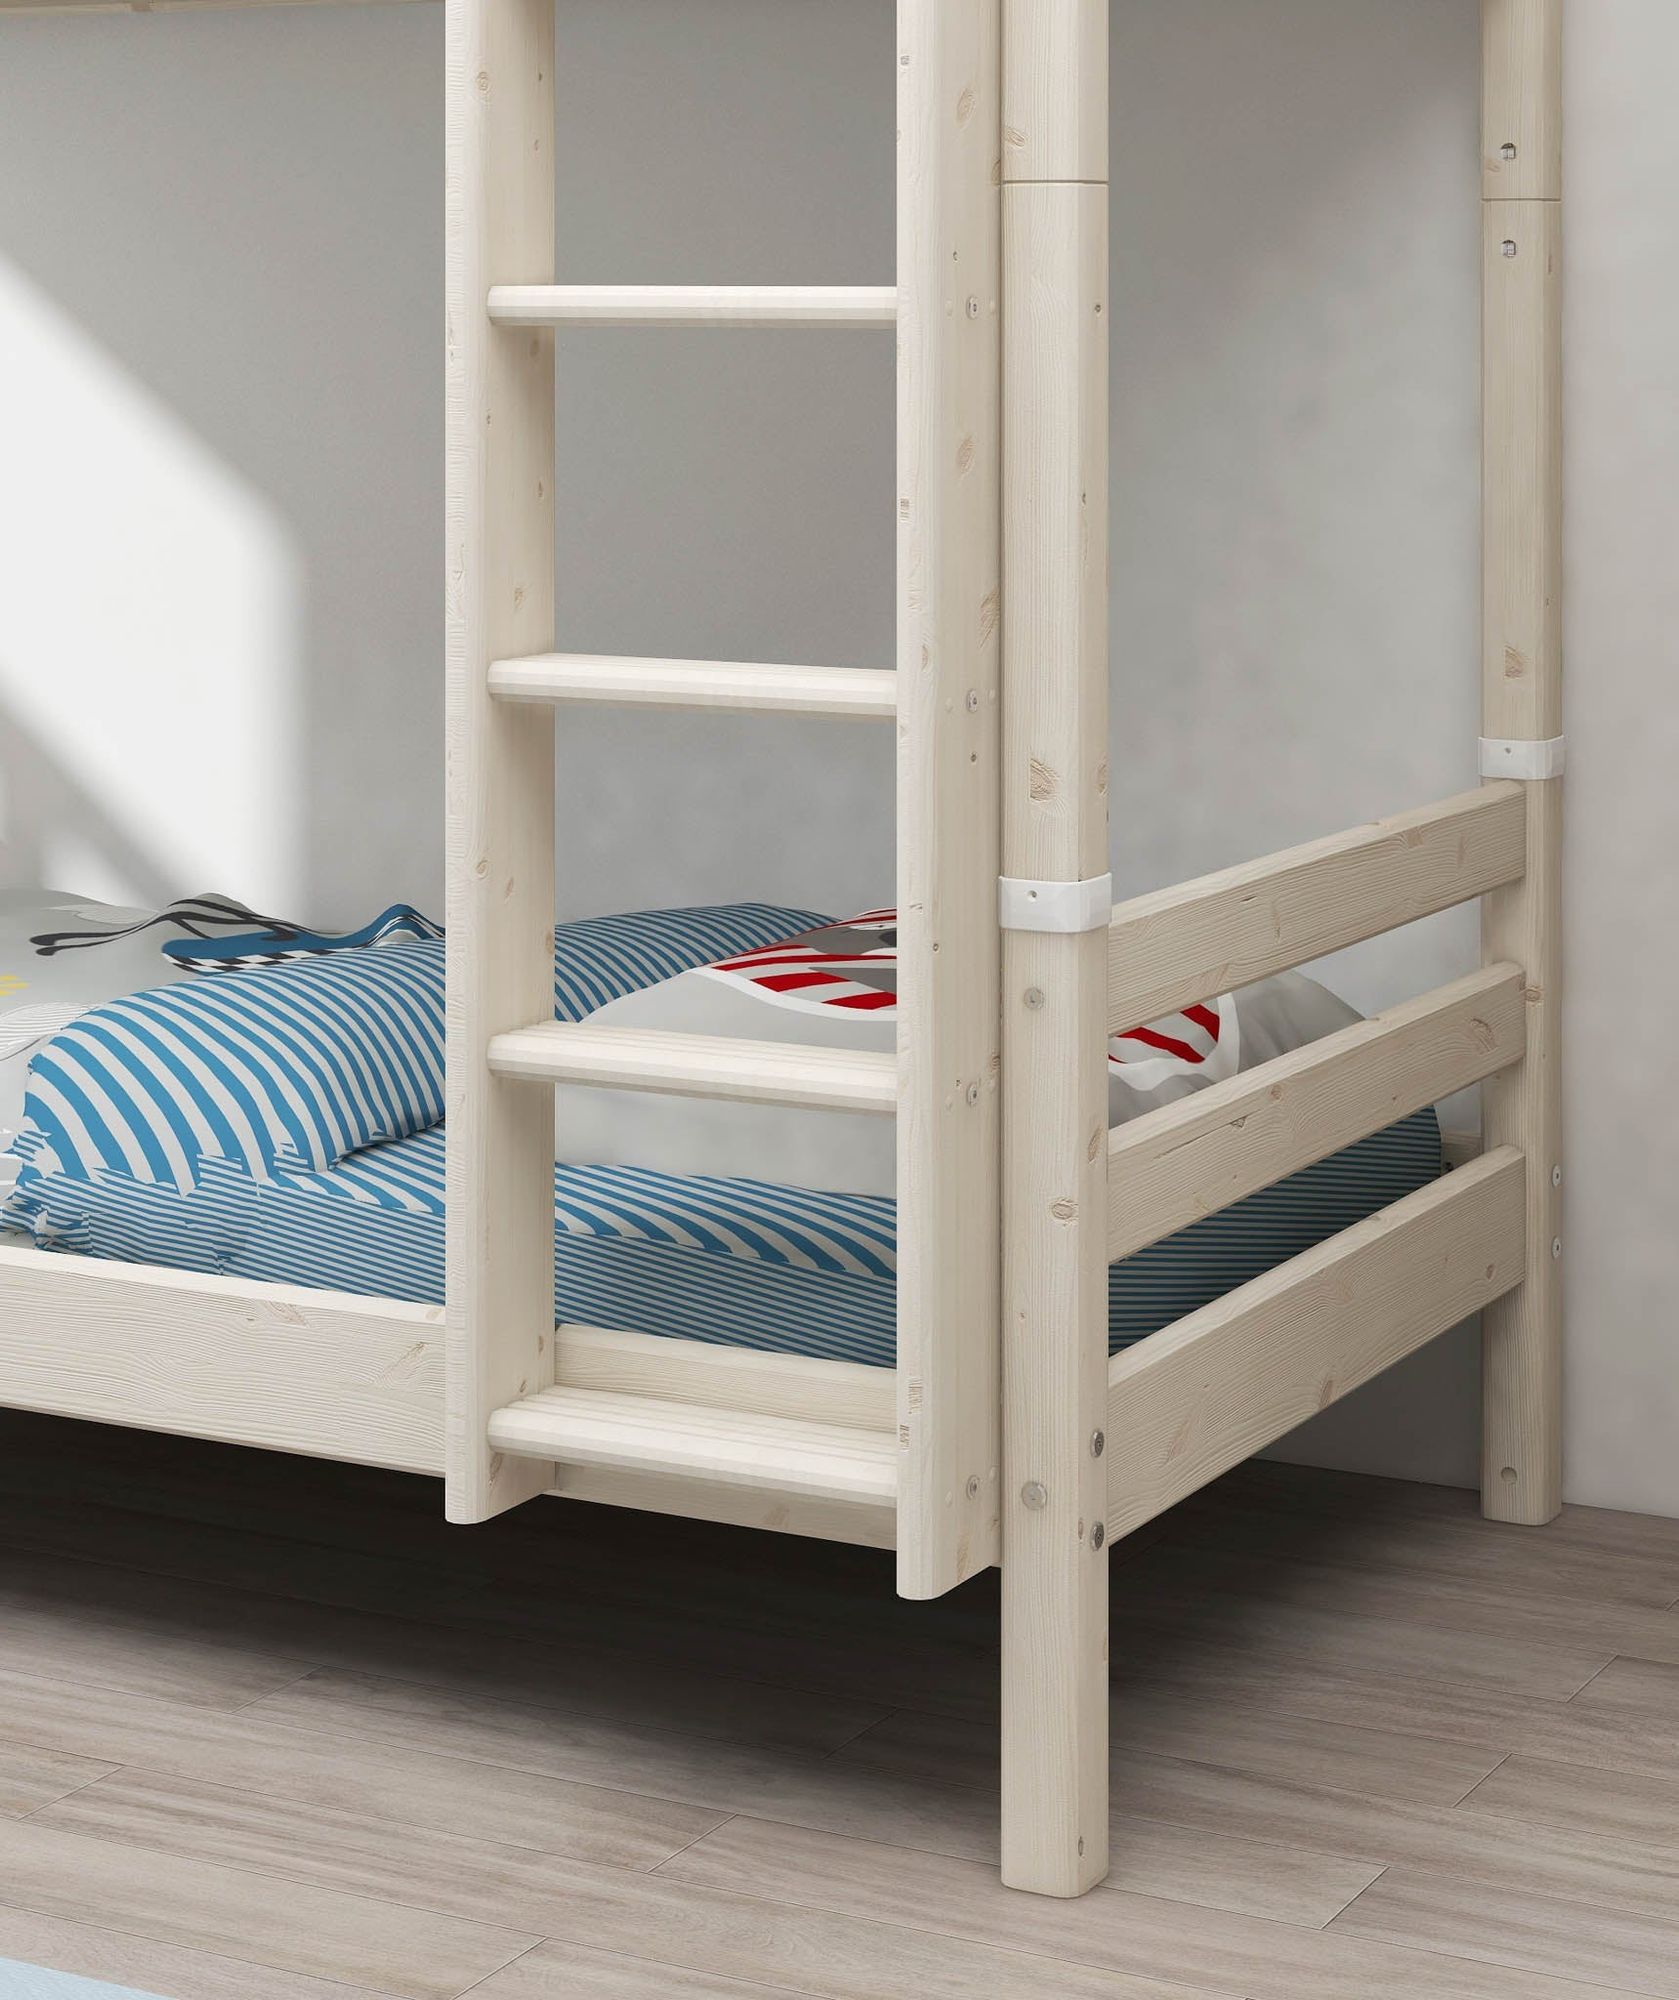 FLEXA Bunk bed w. extra height and straight ladder